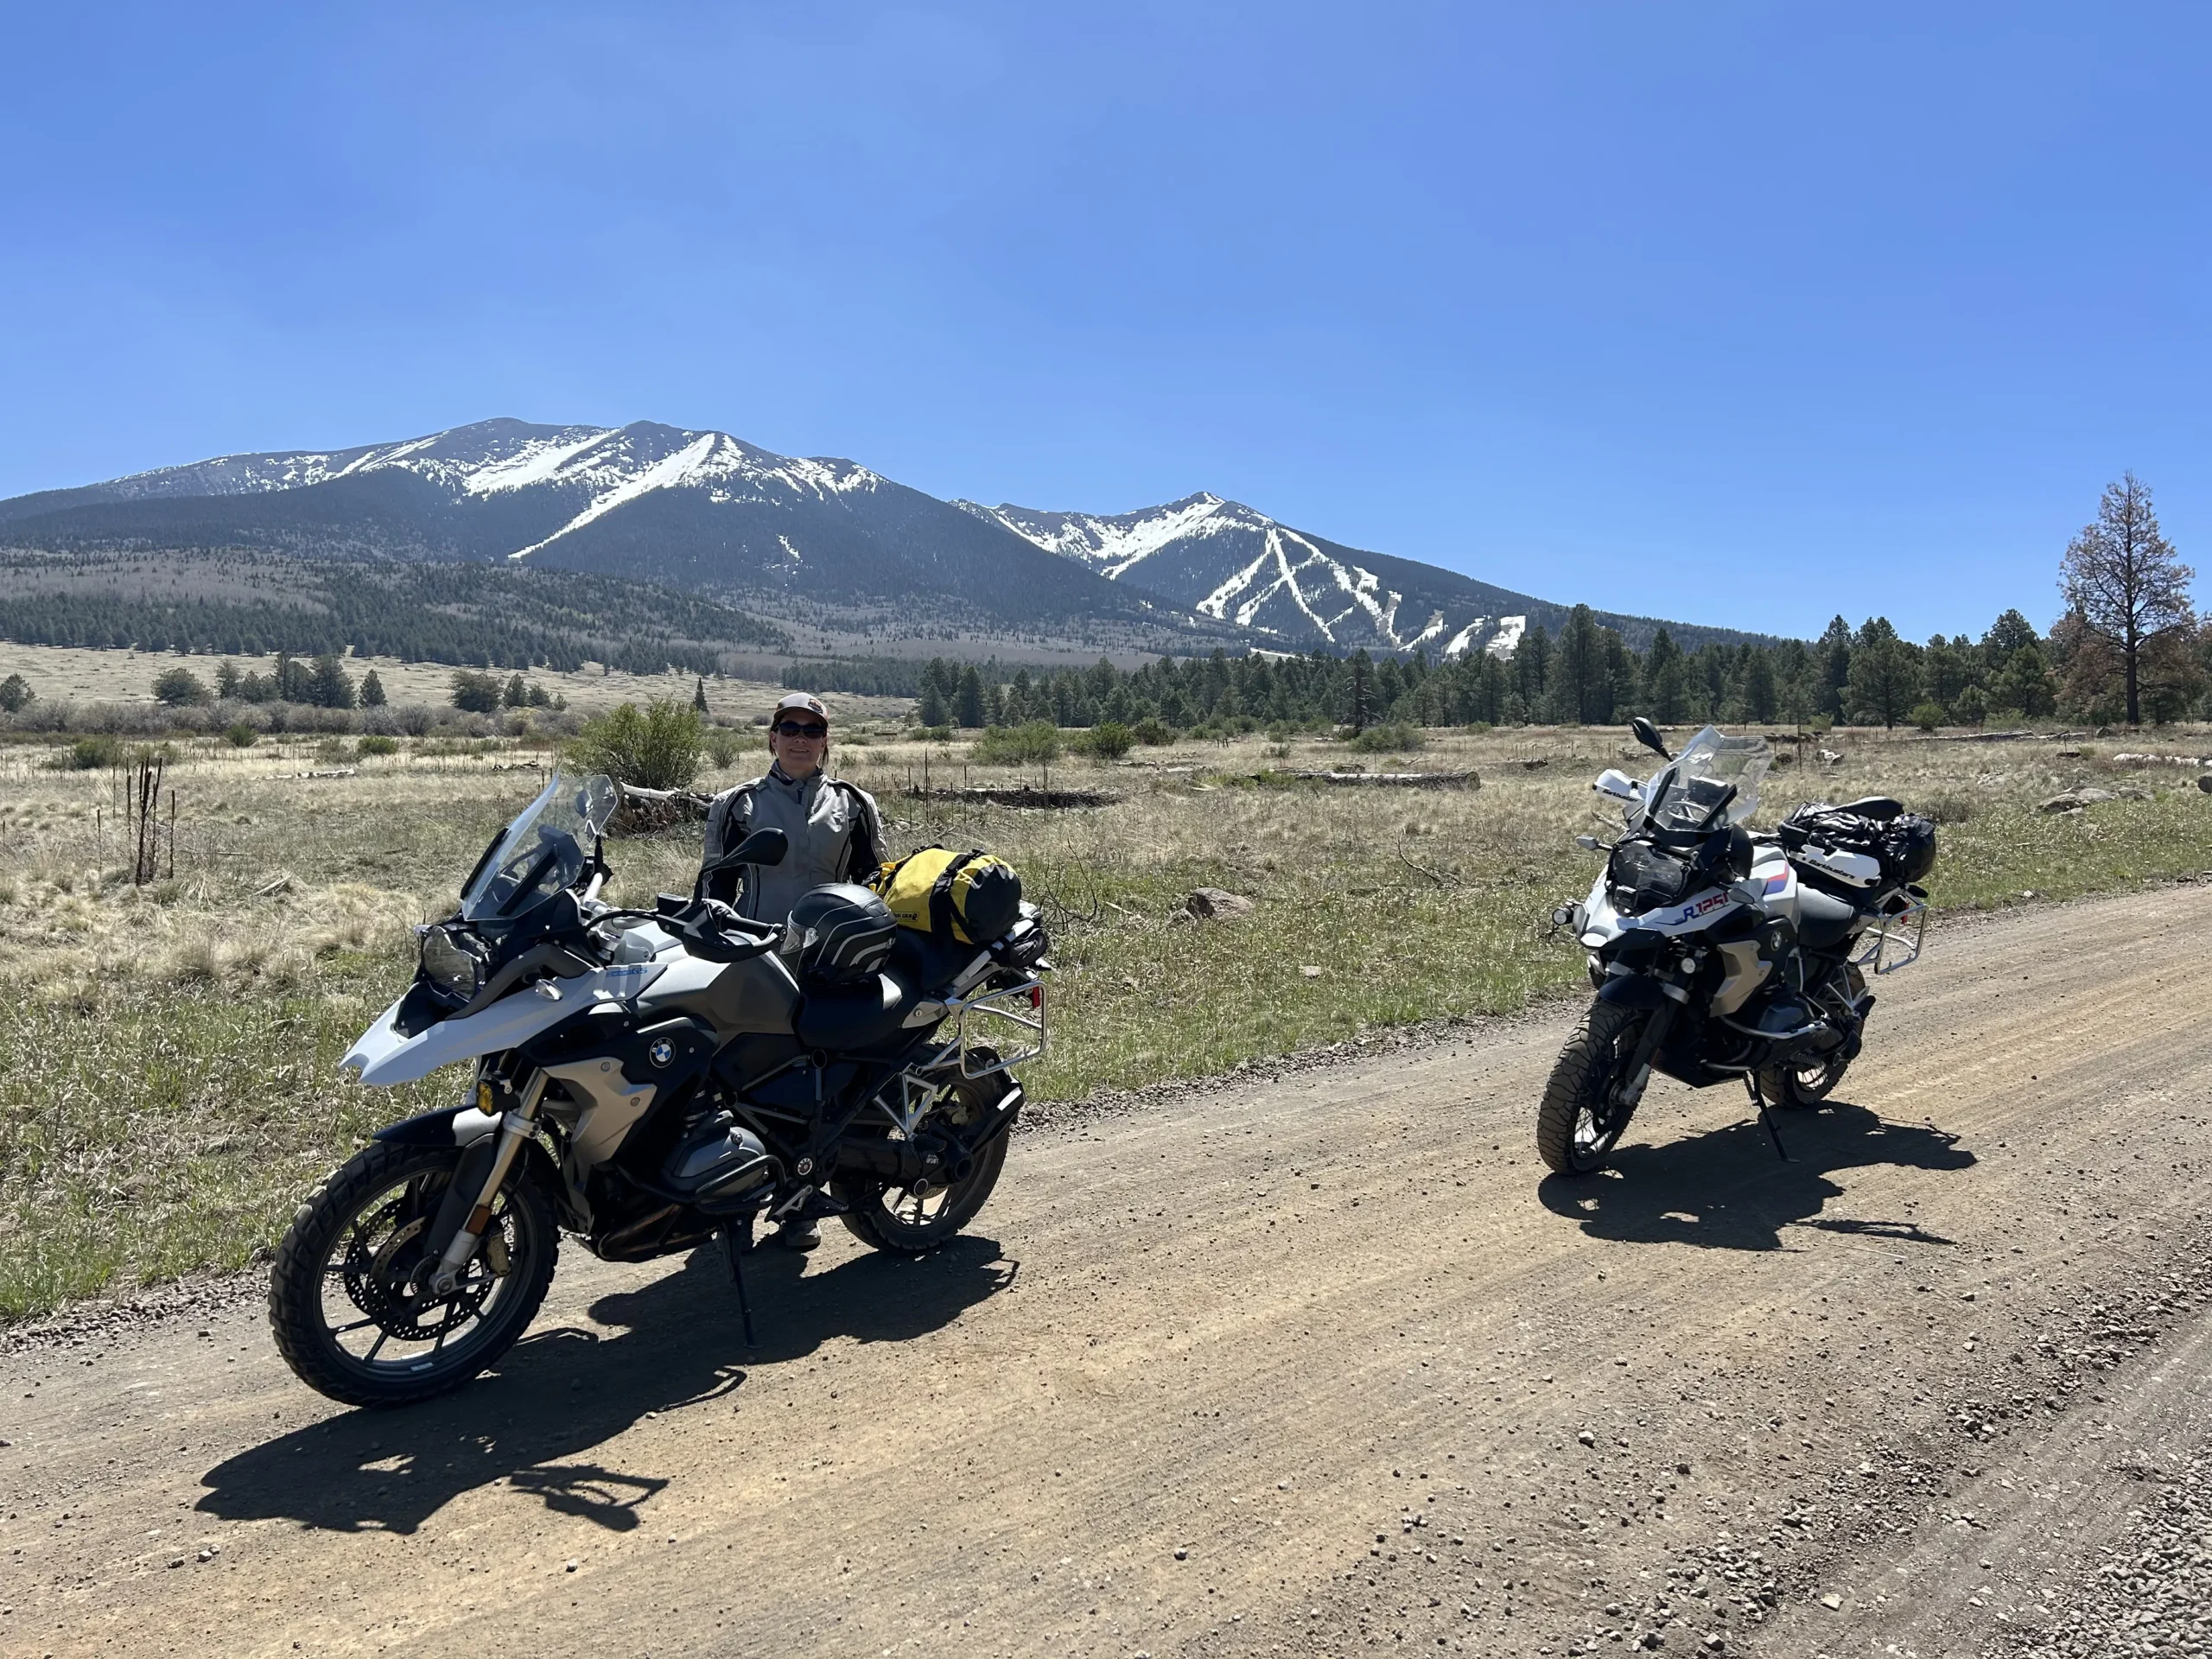 Two BMW adventure motorcycles in front of the snowcapped Mt. Humphreys, Arizona's tallest point